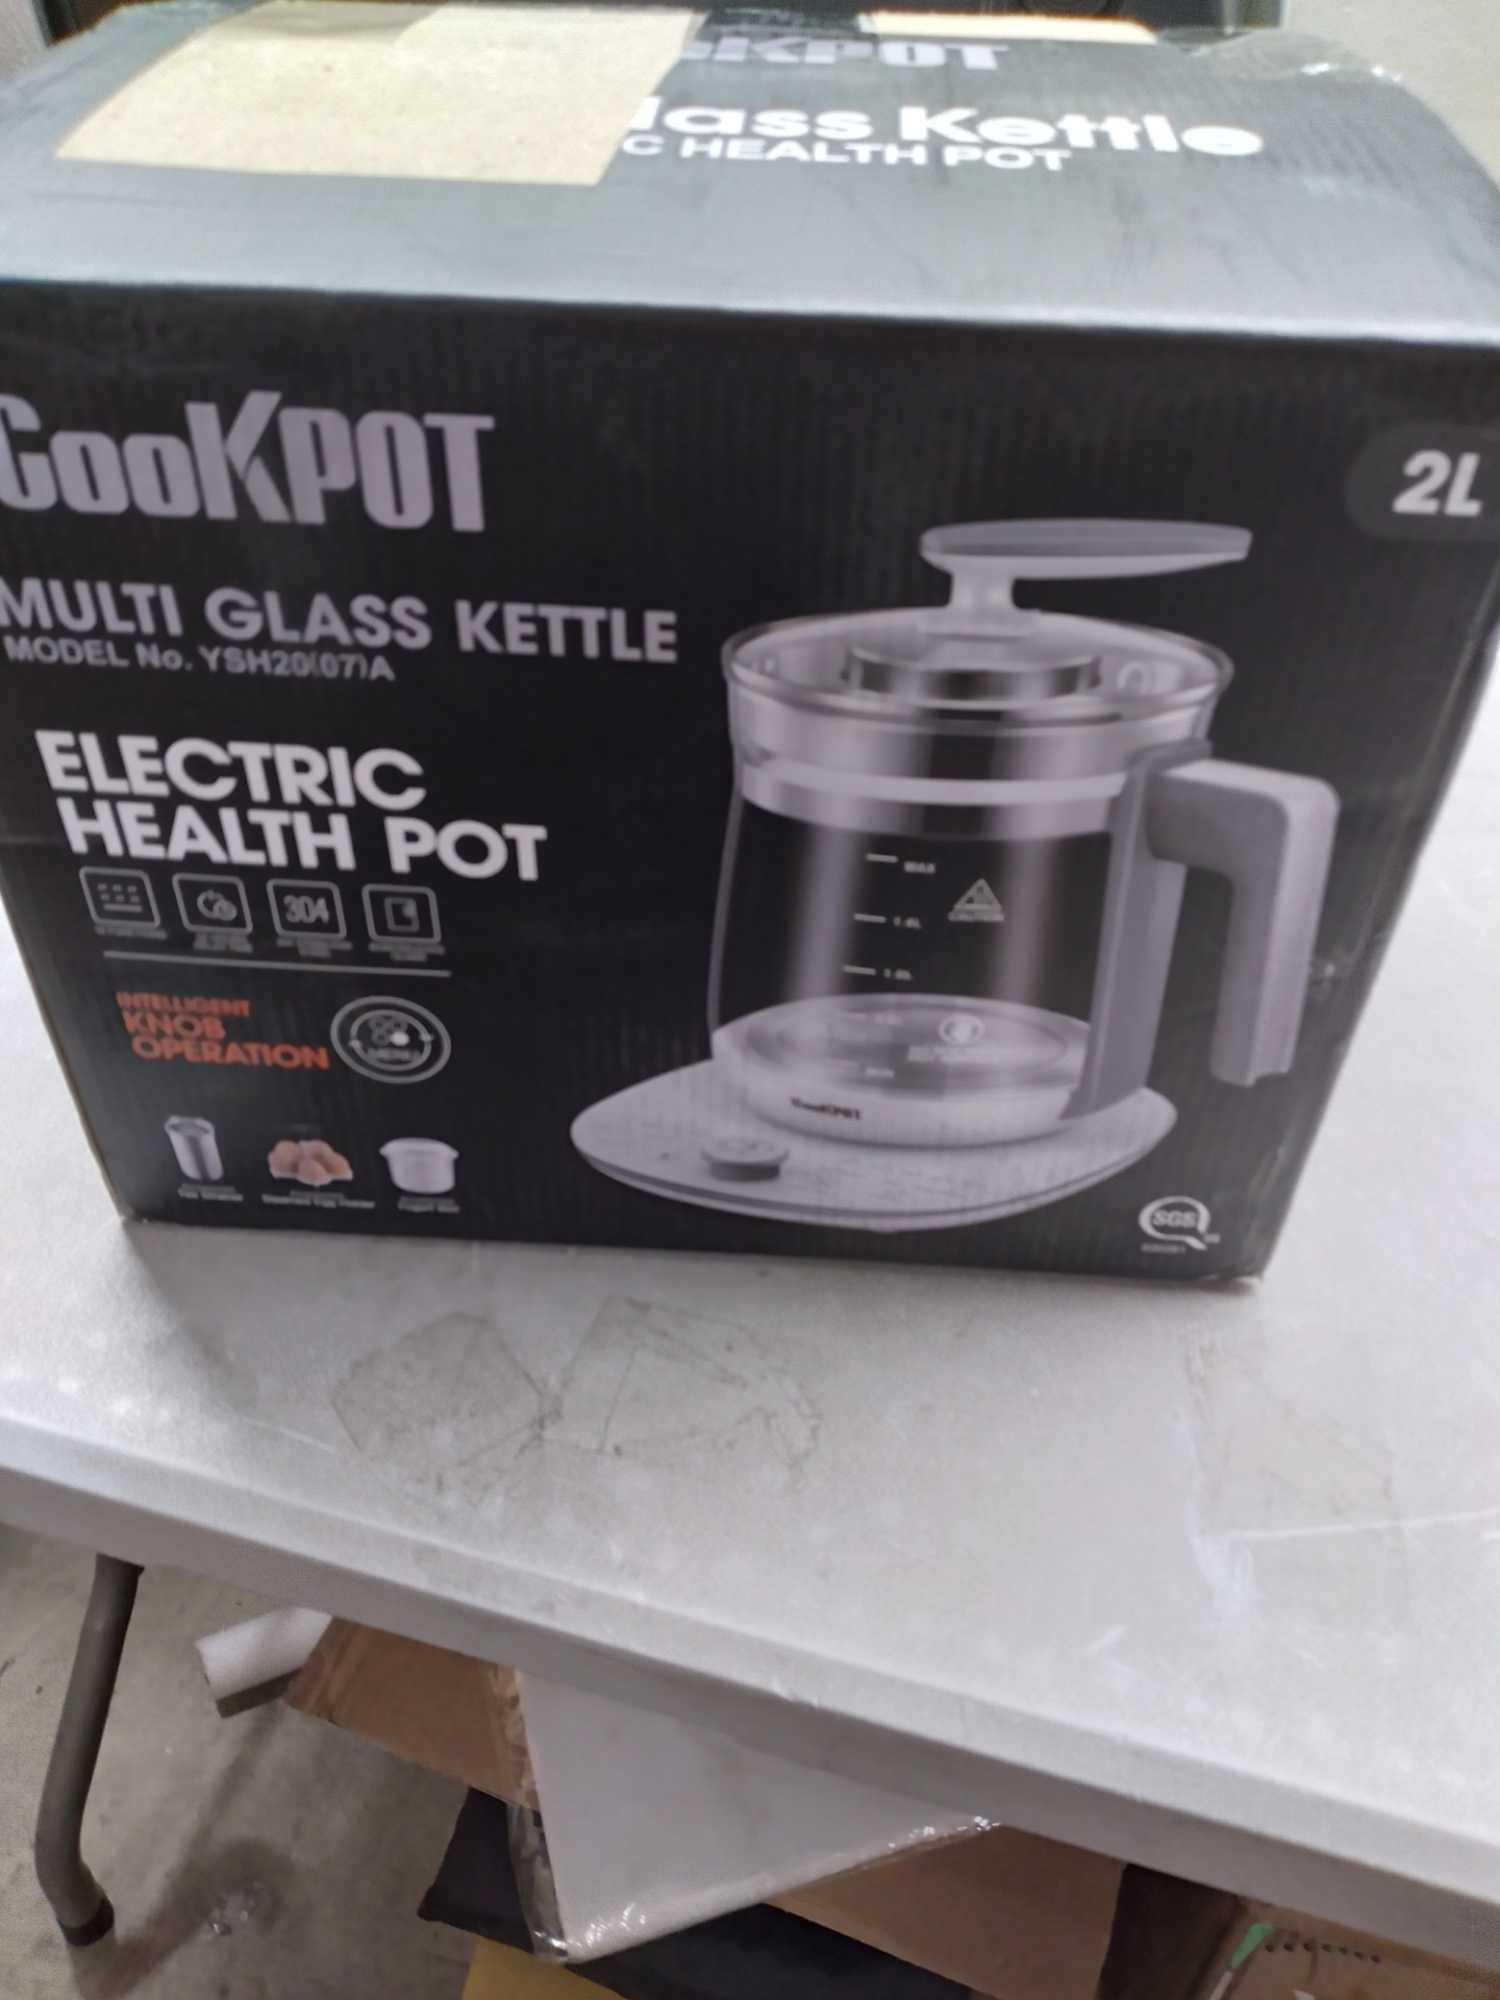 ICOOKPOT Multi-Use Electric Kettle Borosilicate Glass Programmable used once